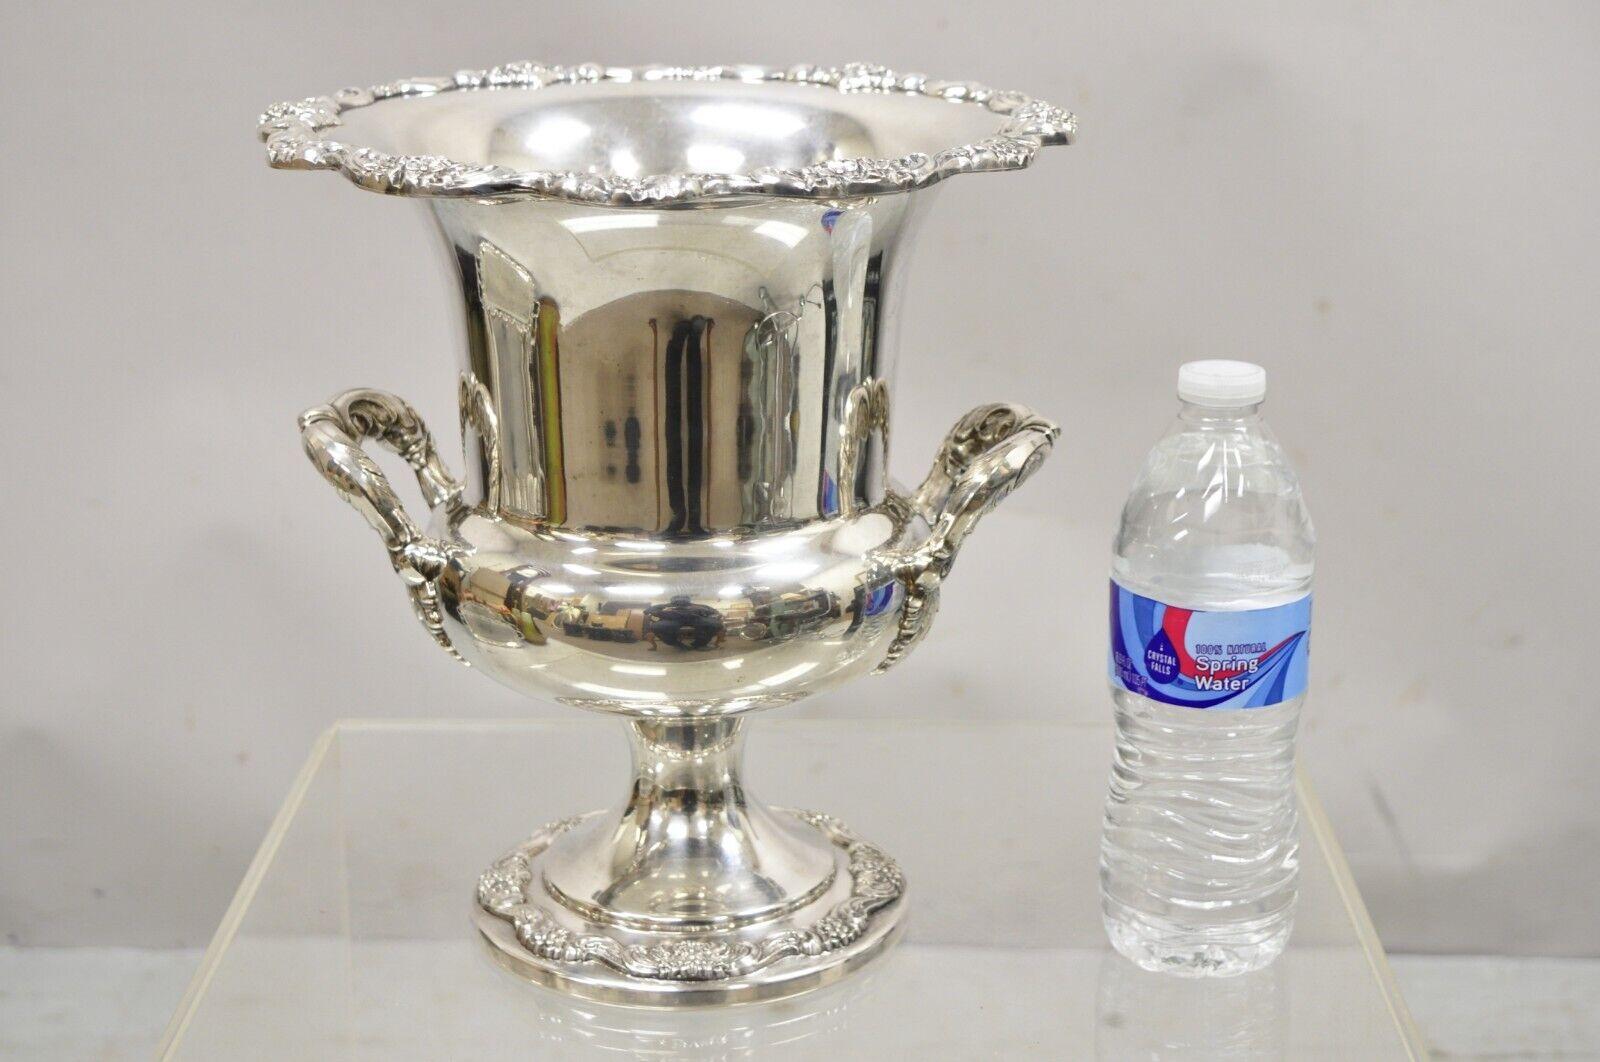 Poole English Regency silverplate trophy cup urn champagne wine chiller bucket. Item features removable liner, ornate twin handles, floral decorated rim and base, stamp to underside, 